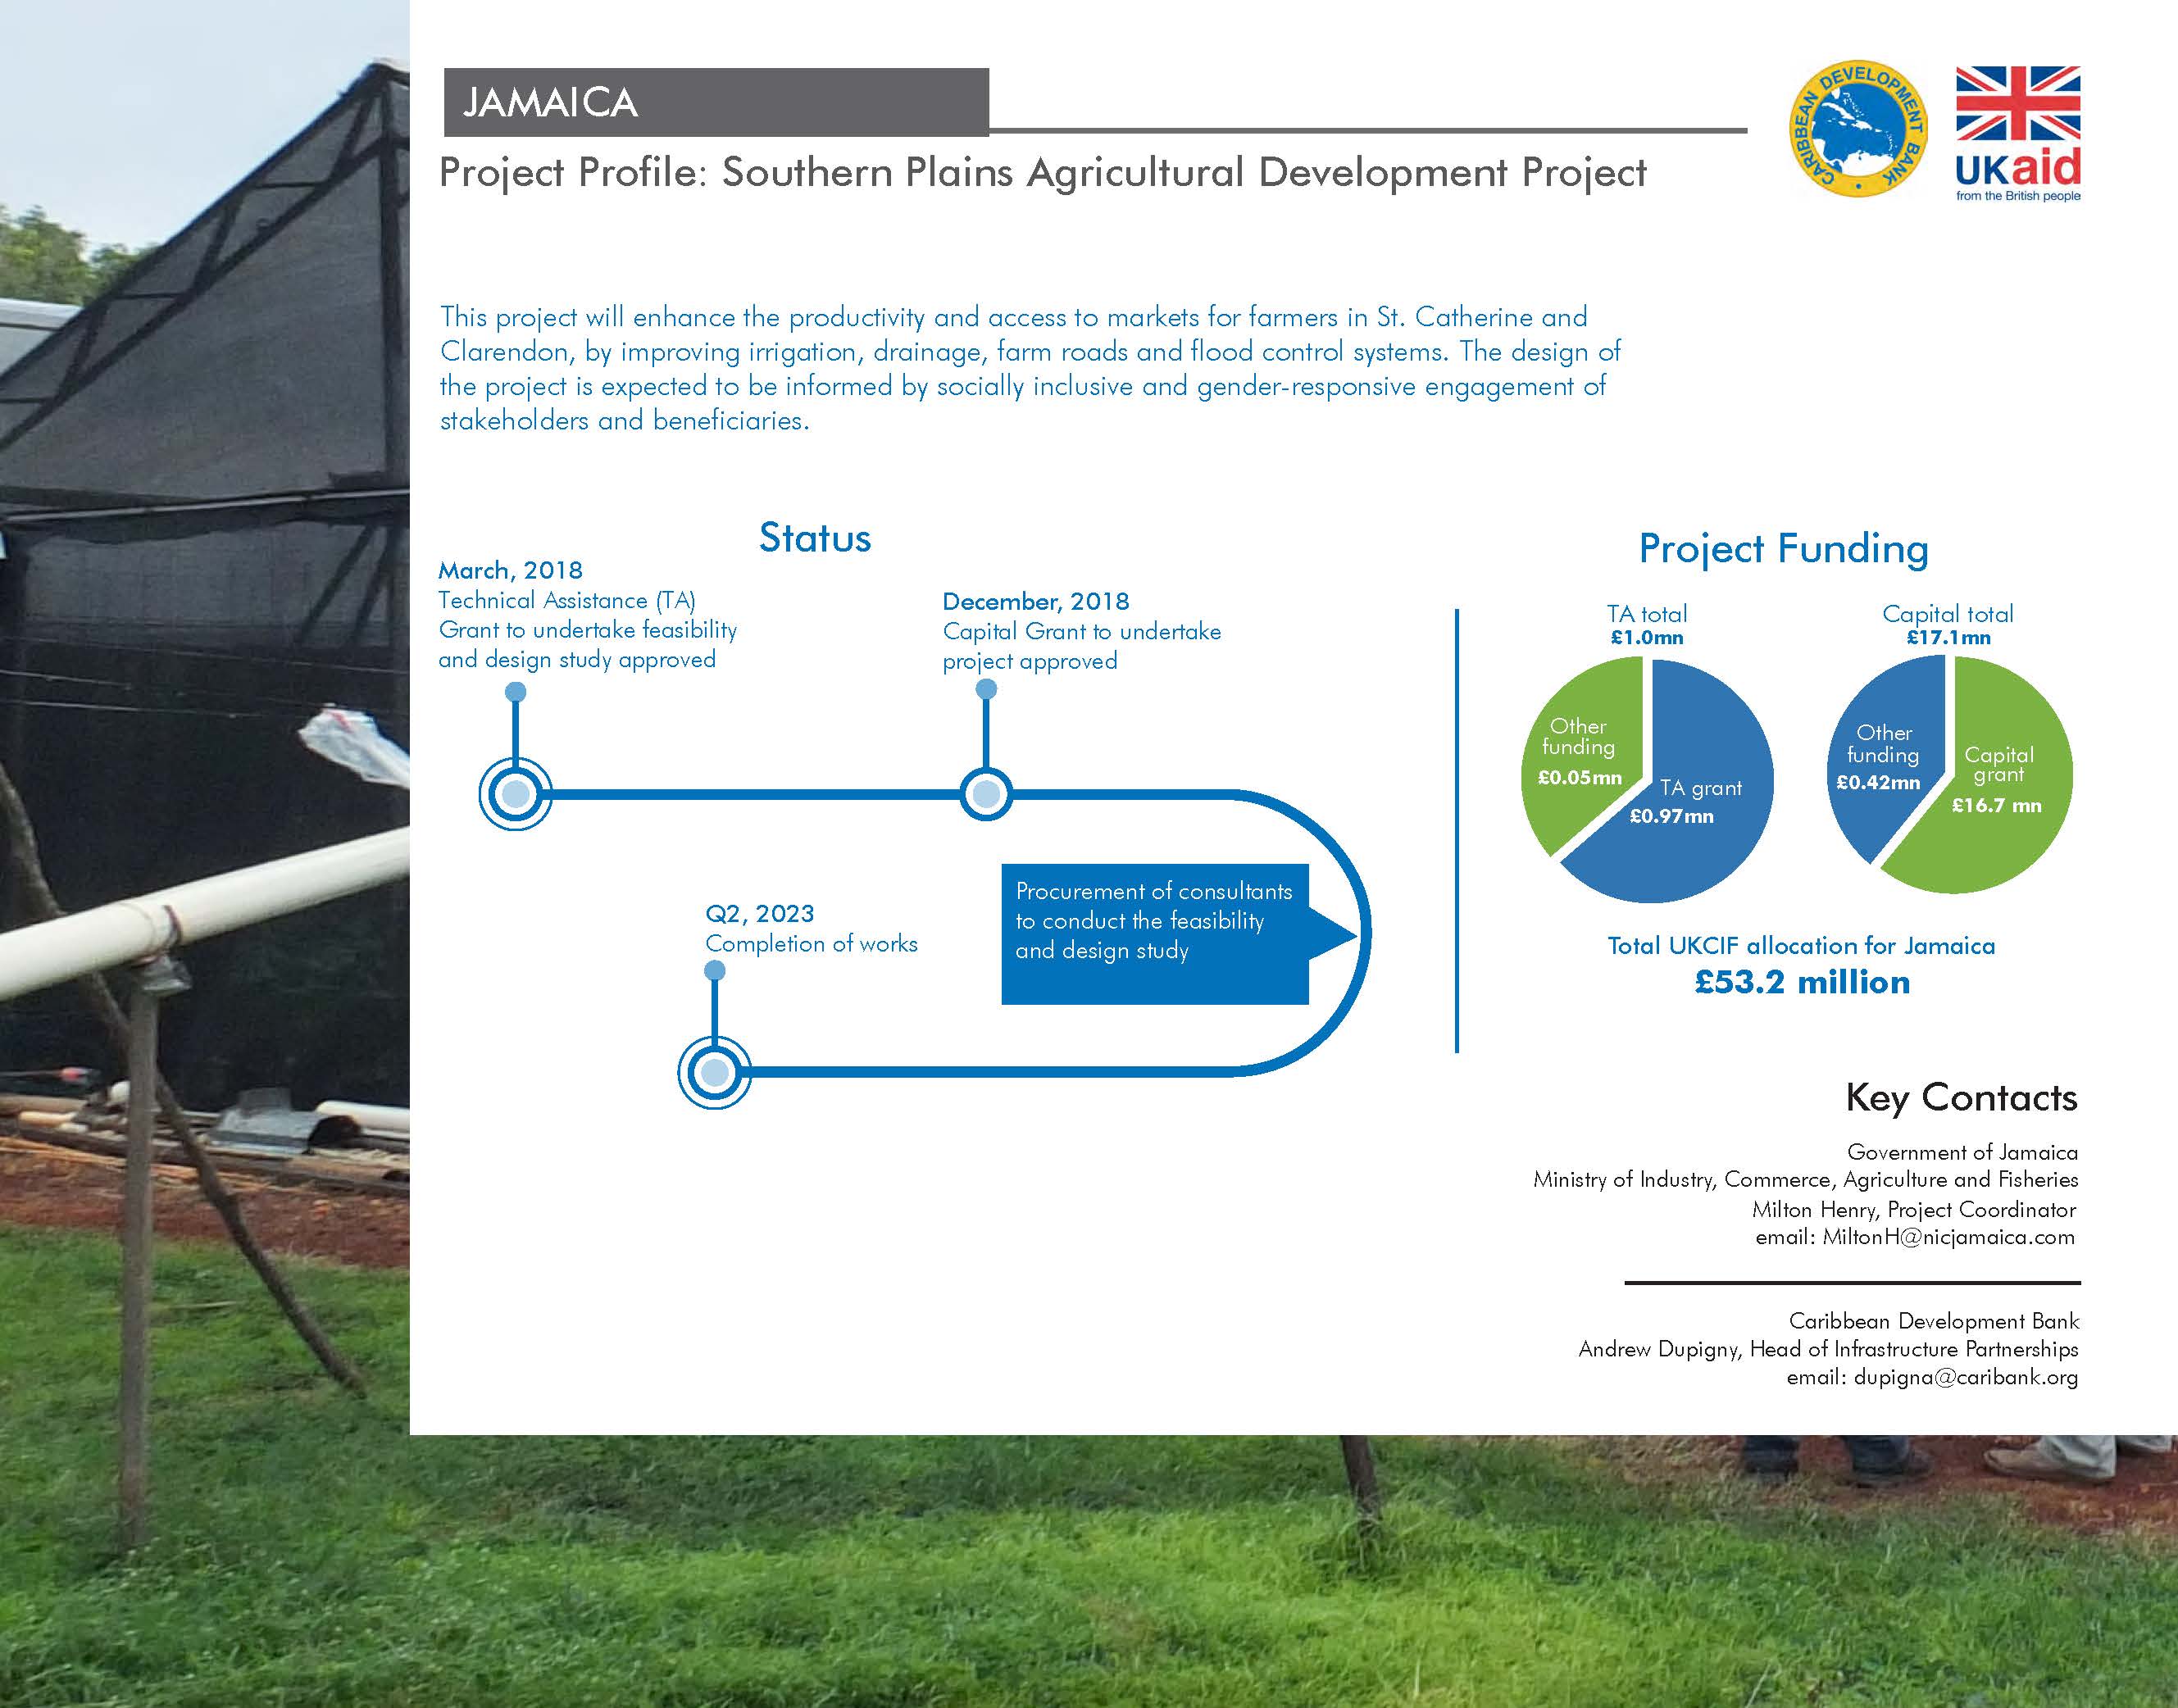 project profile with background image of plant cultivation with text and charts against white backdrop